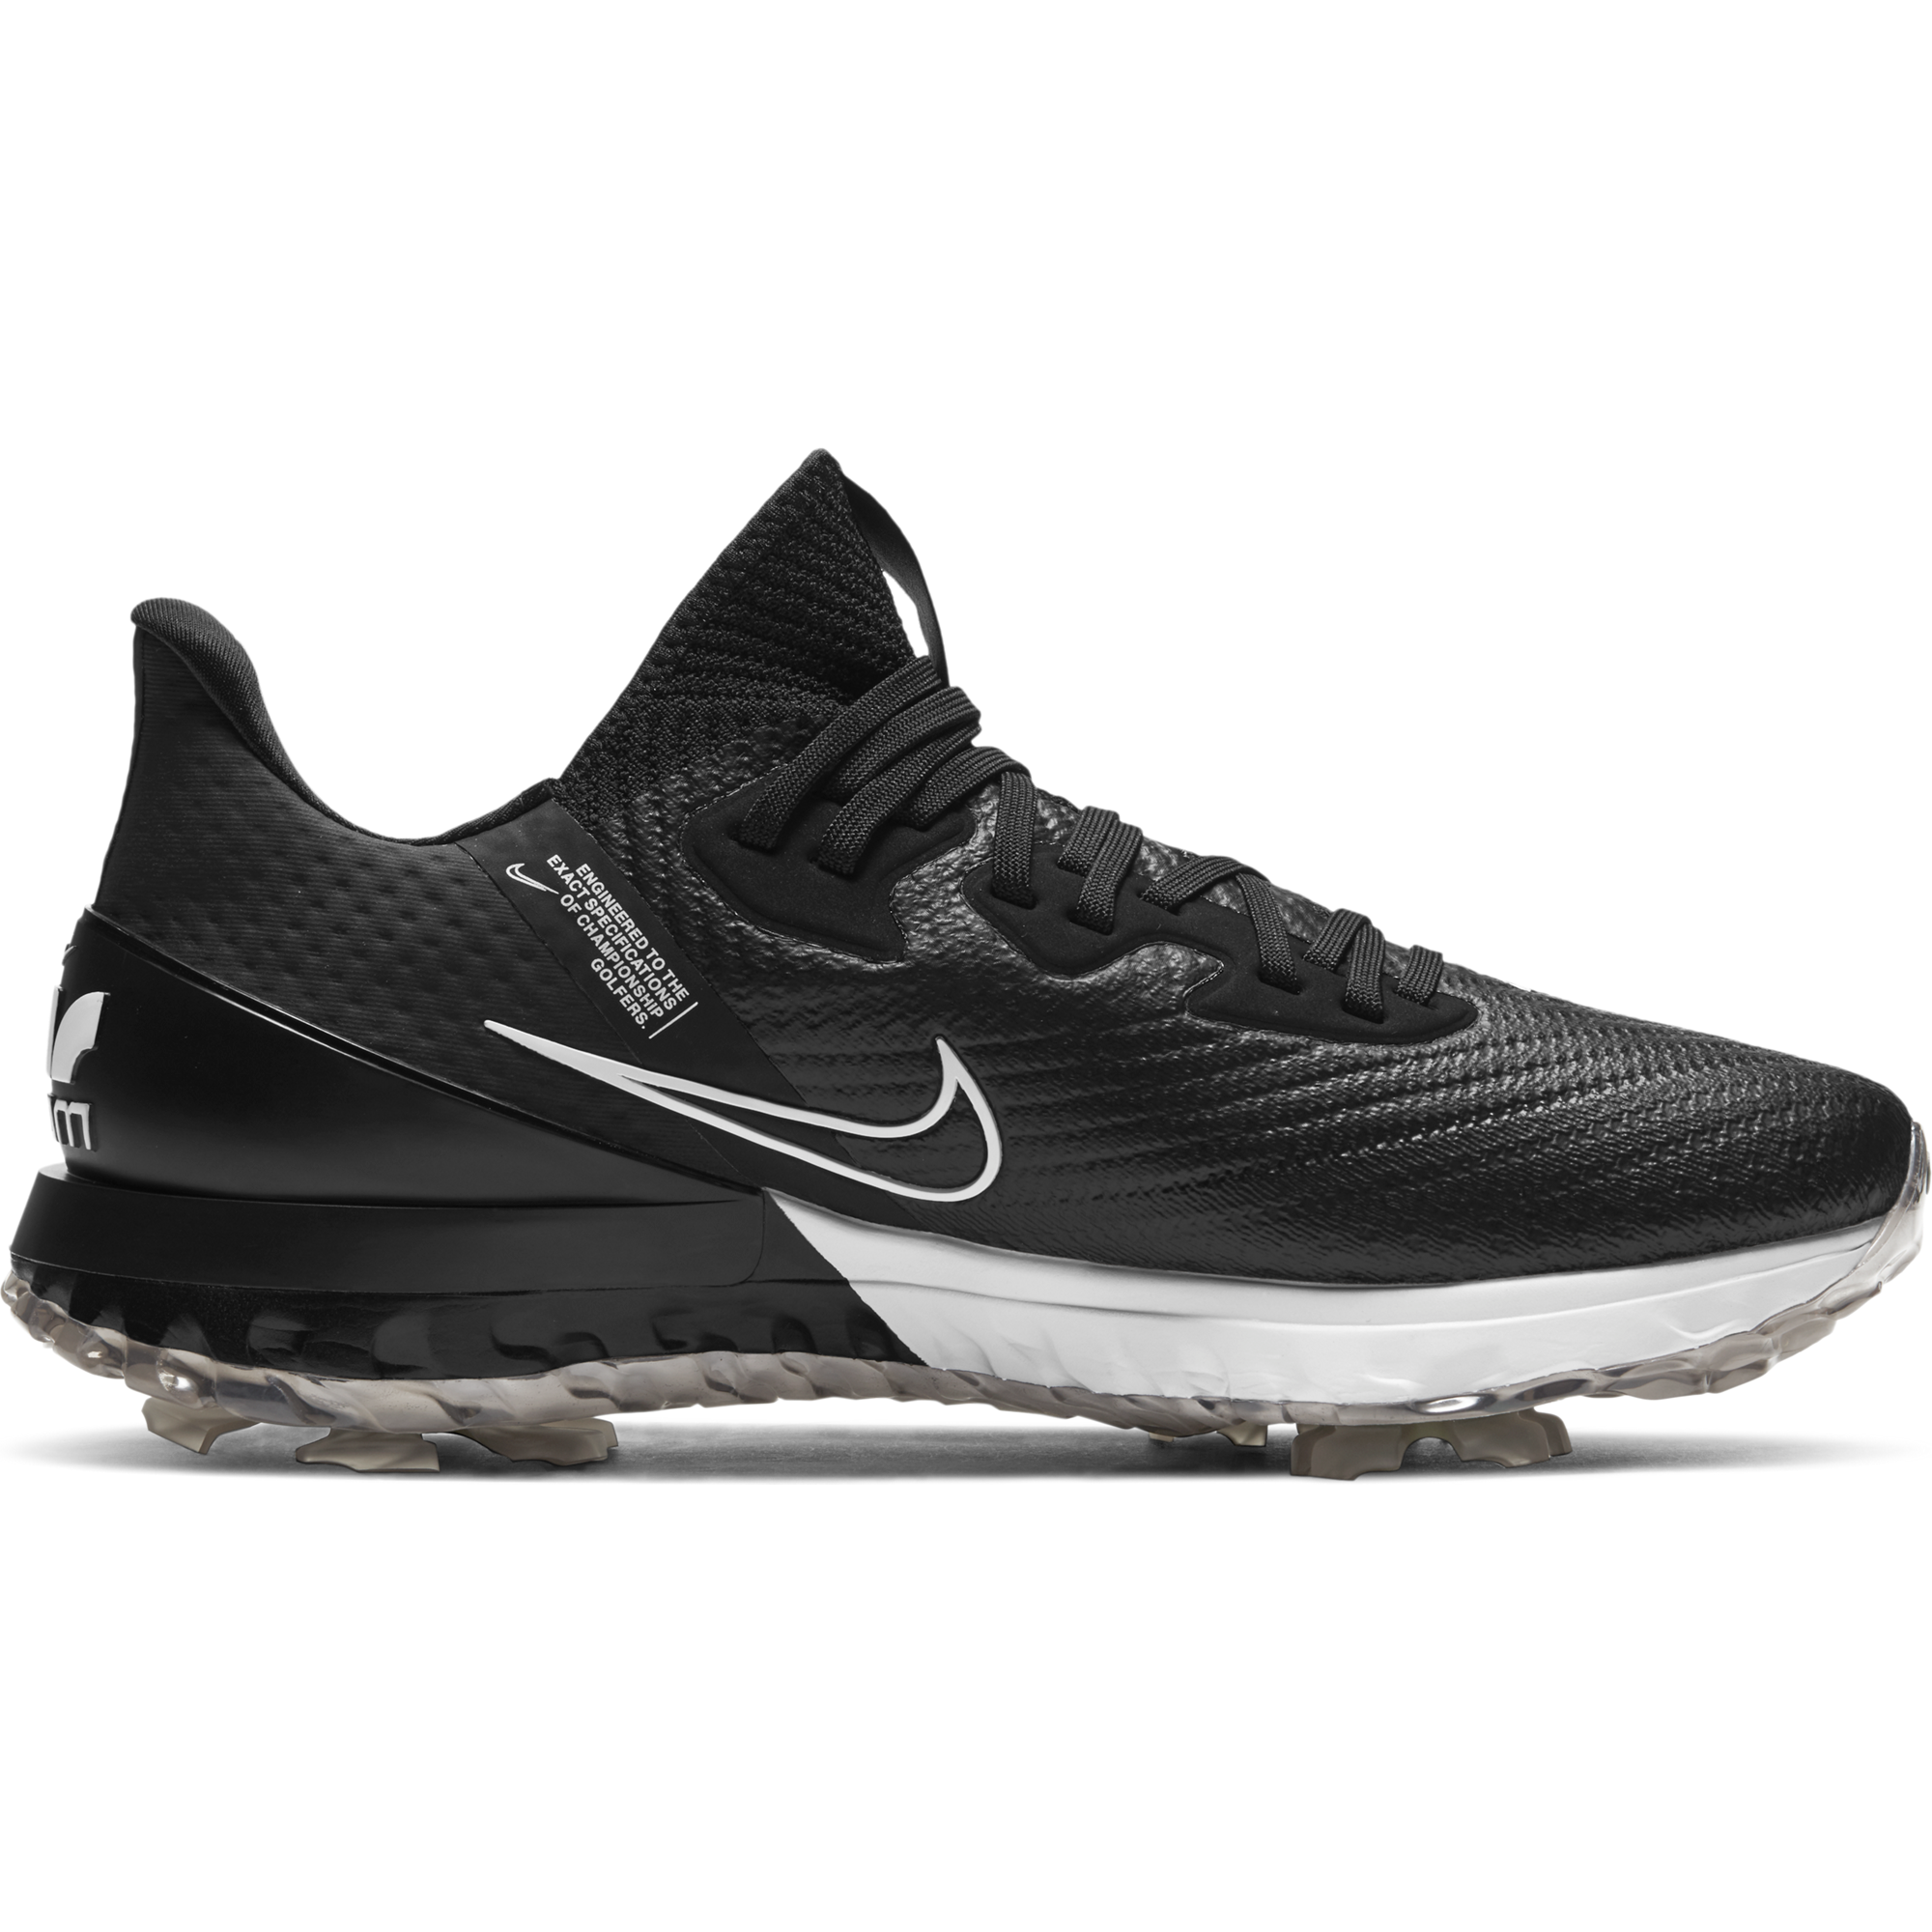 nike men's spiked golf shoes